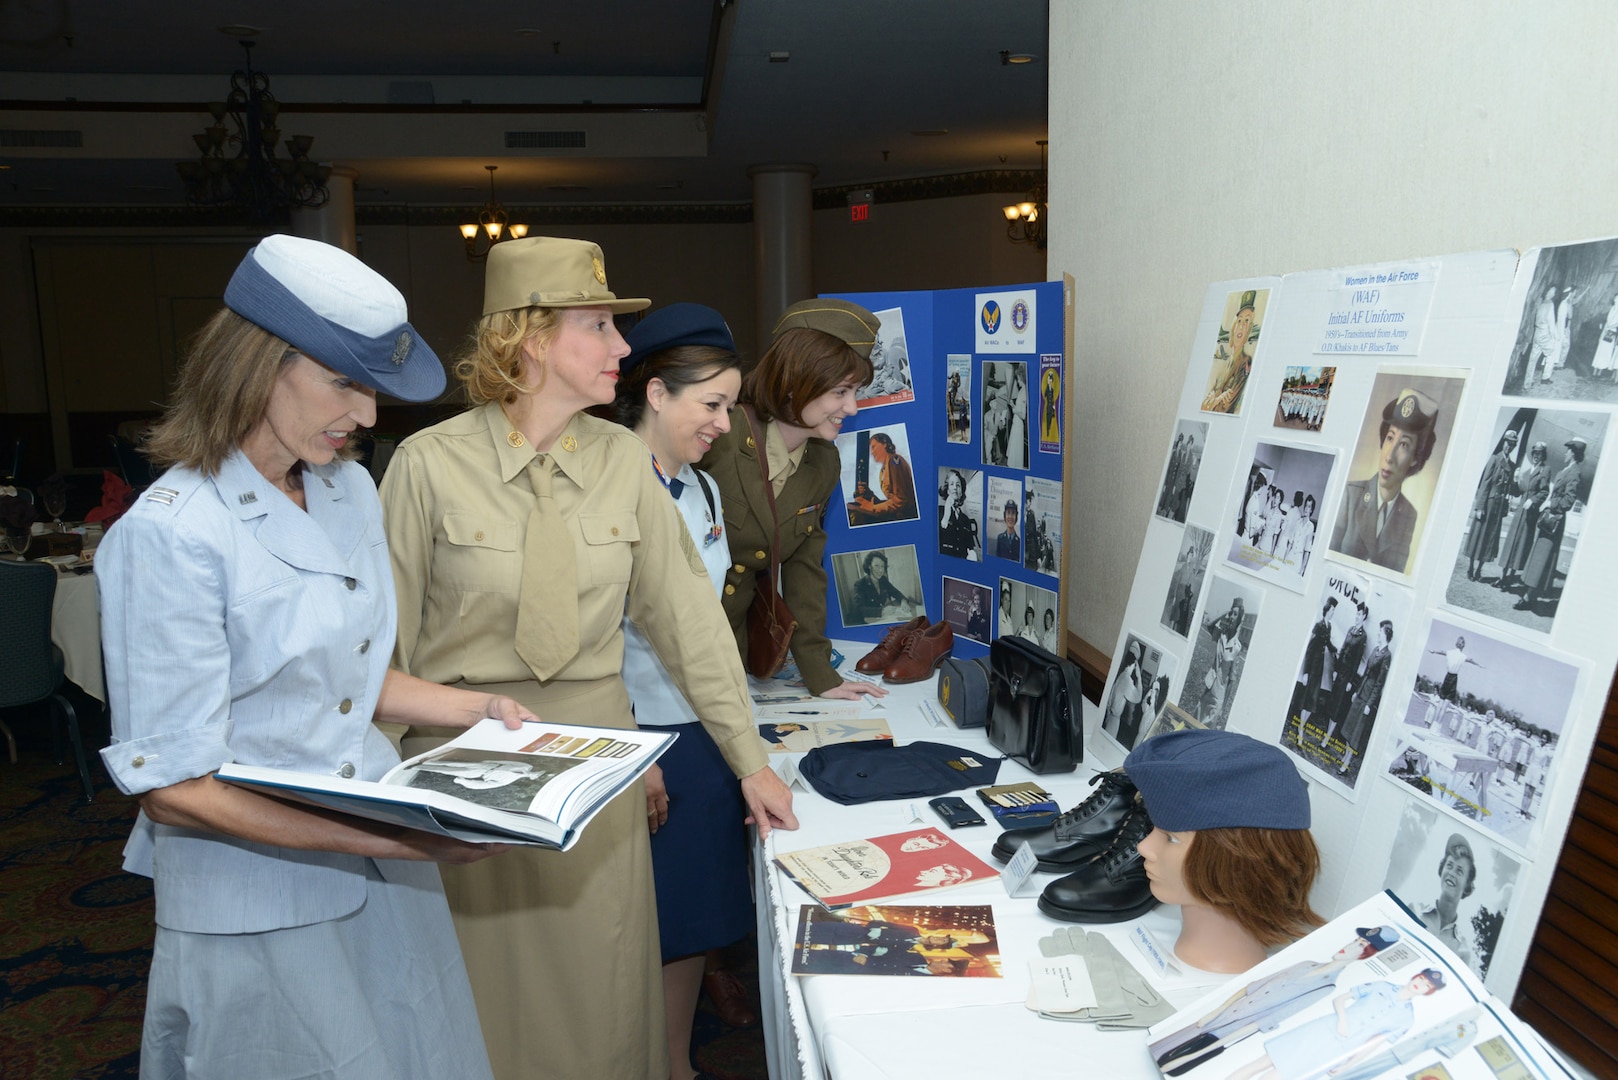 From left: Andrea Gindhart, Kim Kublie, Janet Lujan and Katie Bredeen observe a
display Nov. 21 during the Women of the Air Force event sponsored by the JBSARandolph
Officers' Spouses' Club at the JBSA-Randolph Parr Club. (U.S. Air Force photo by Joel Martinez)